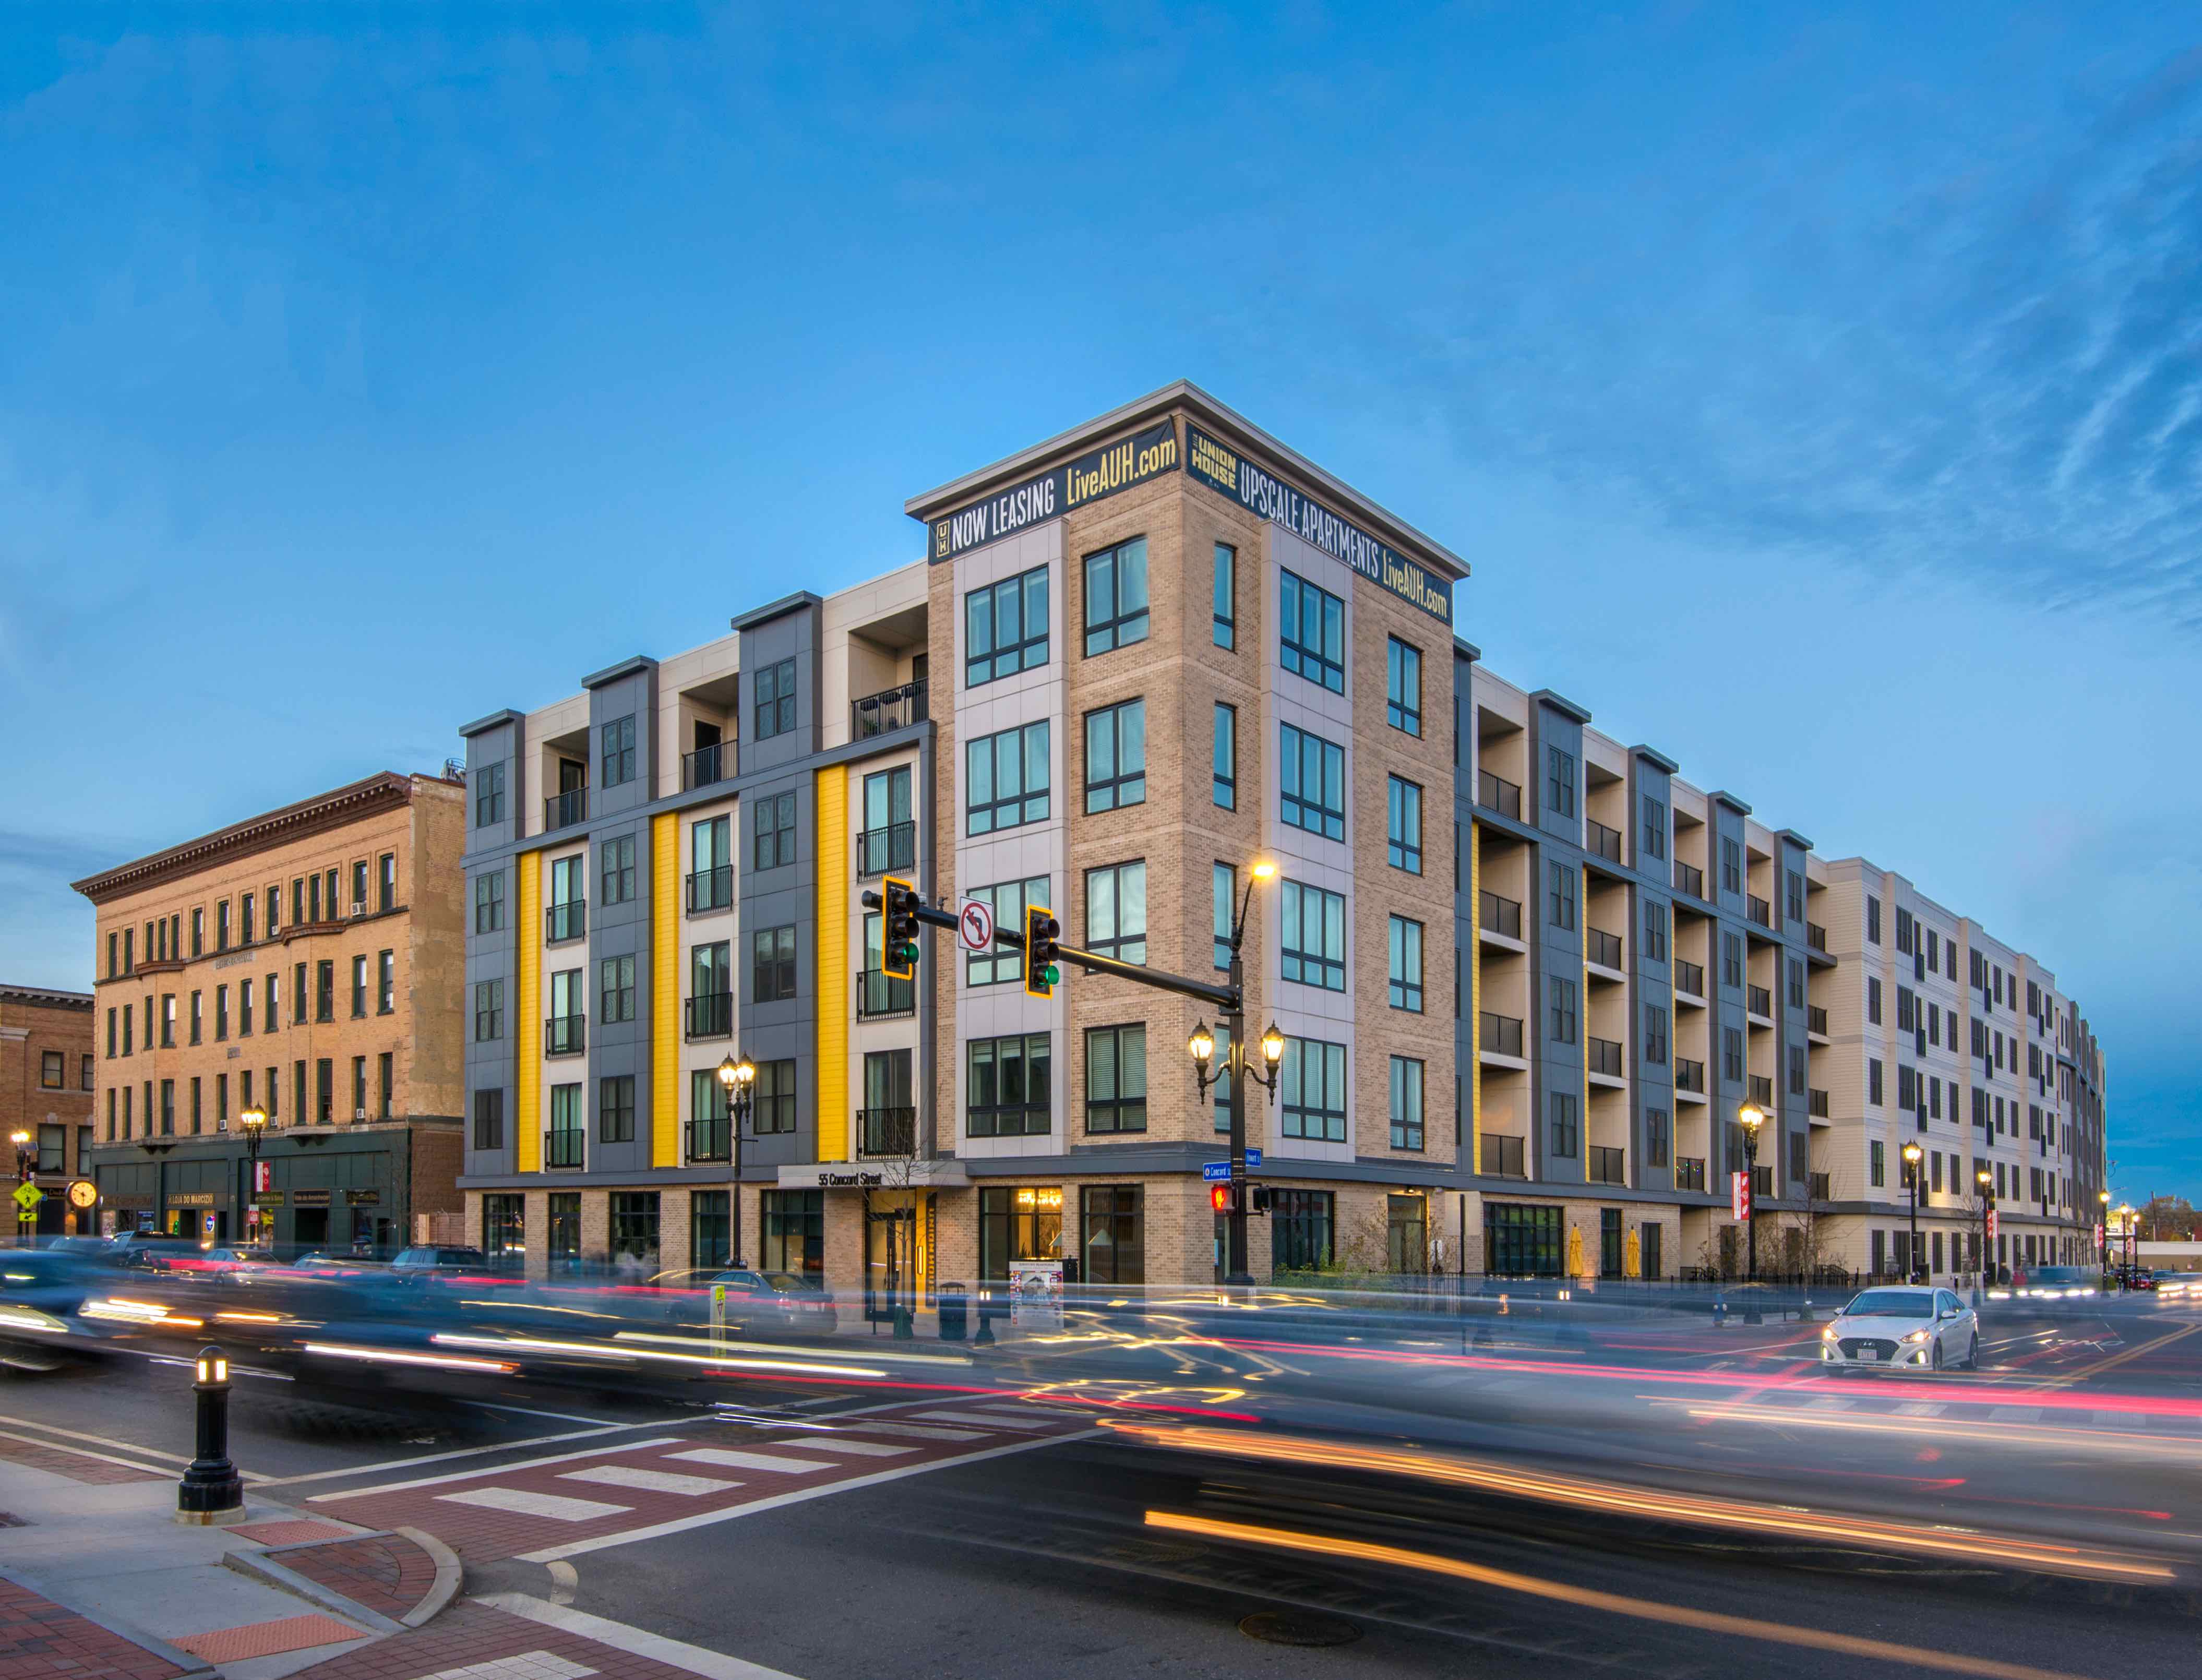 Transit-oriented developments like Alta Union House have helped transform smaller cities across the Northeast (Photo Credit: Andy Ryan)